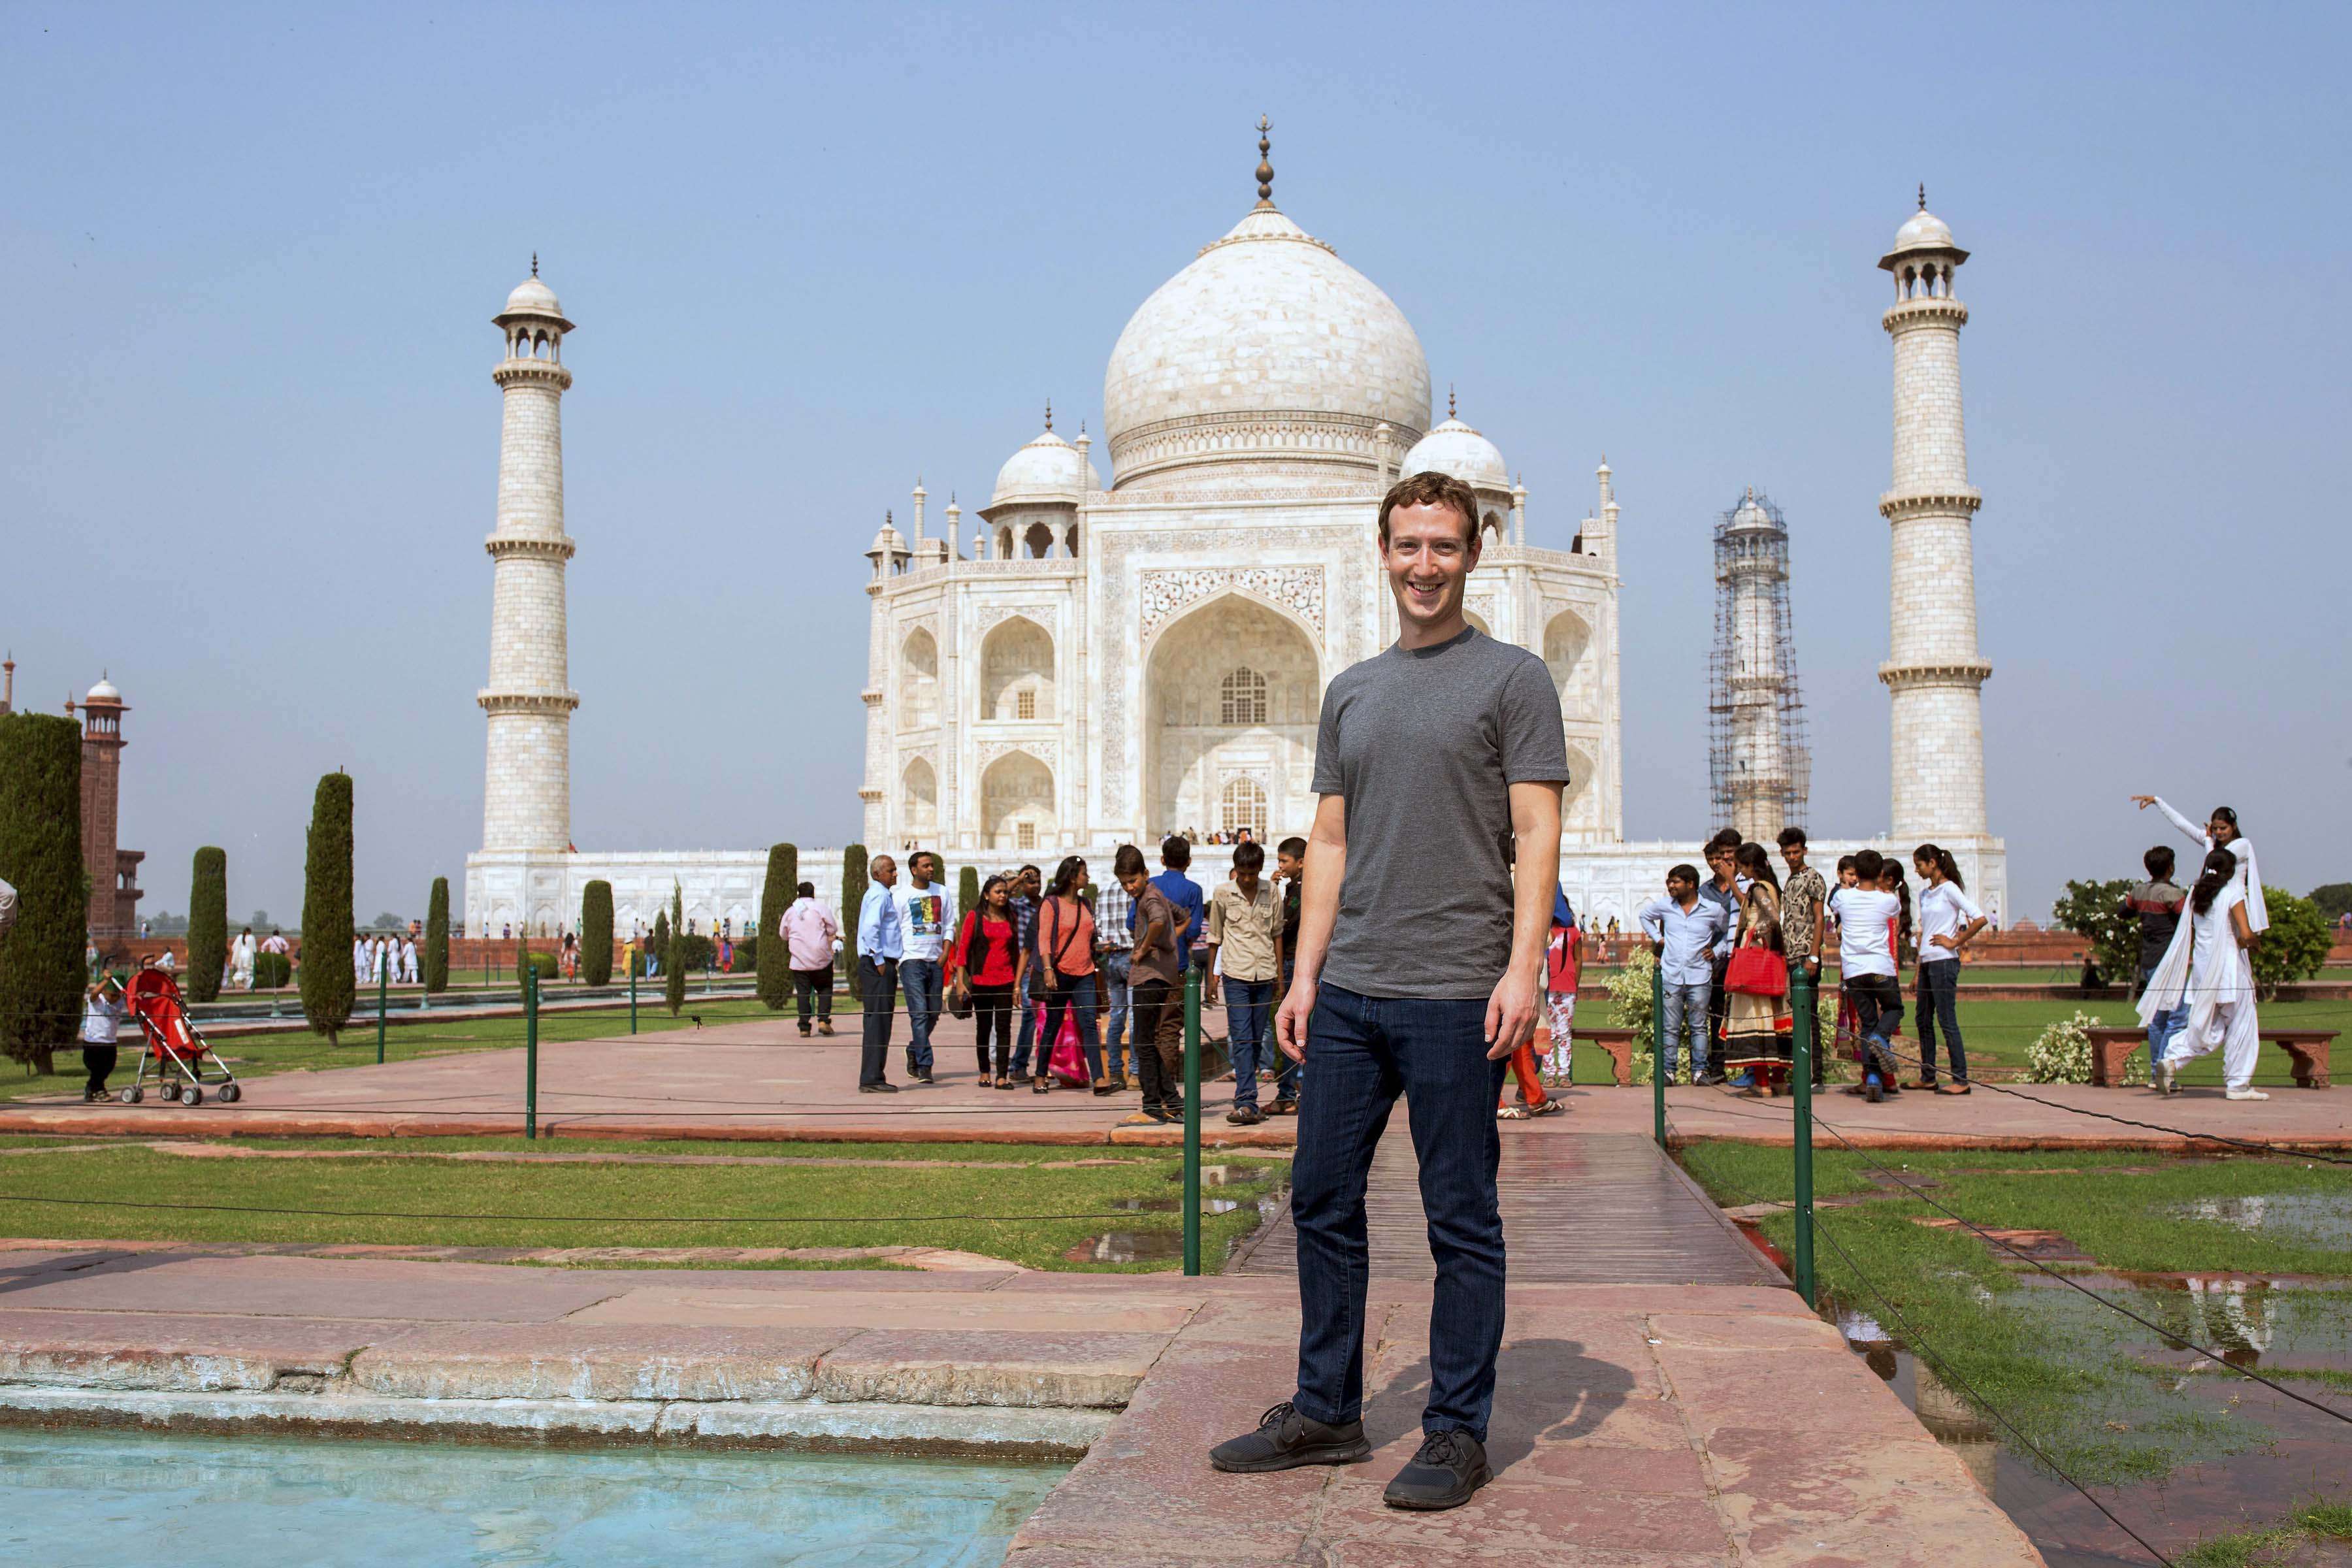 Agra:  Founder & CEO, of Facebook, Mark Zuckerberg pose for photo during his visit at Historical Taj Mahal in Agra on Tuesday. PTI Photo(PTI10_27_2015_000289B)